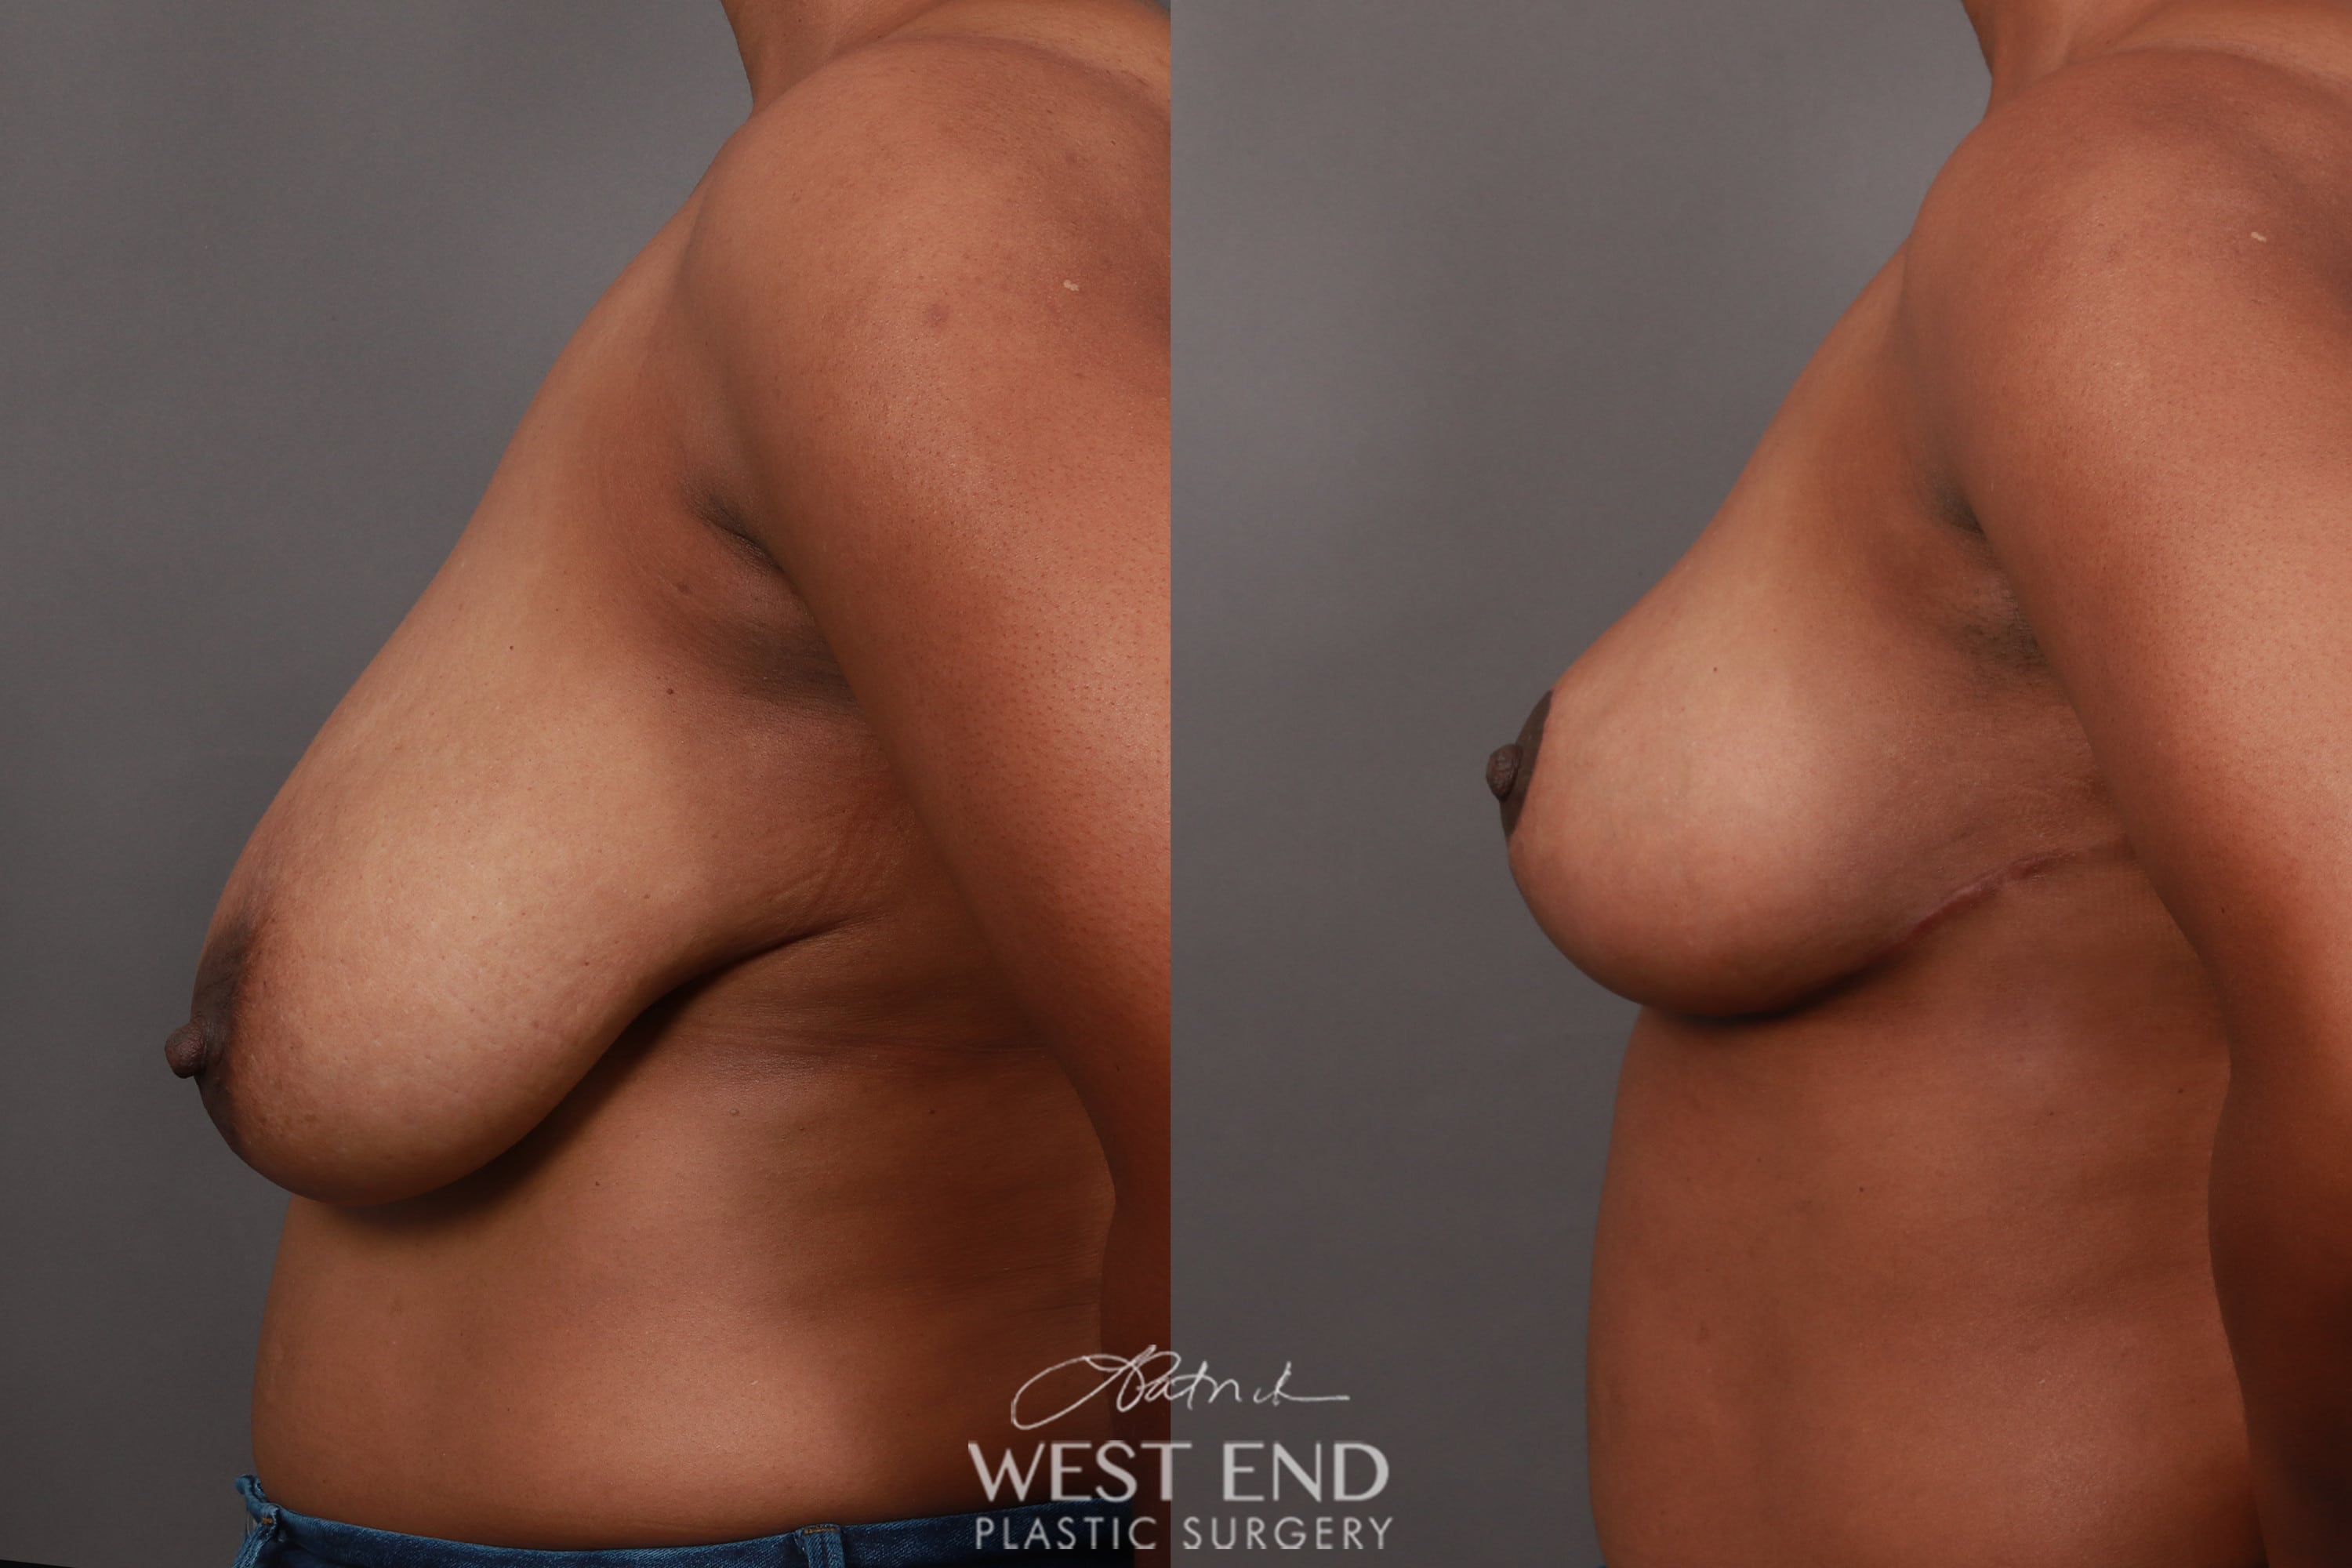 Breast Reduction (3.5 Months Post-Op)